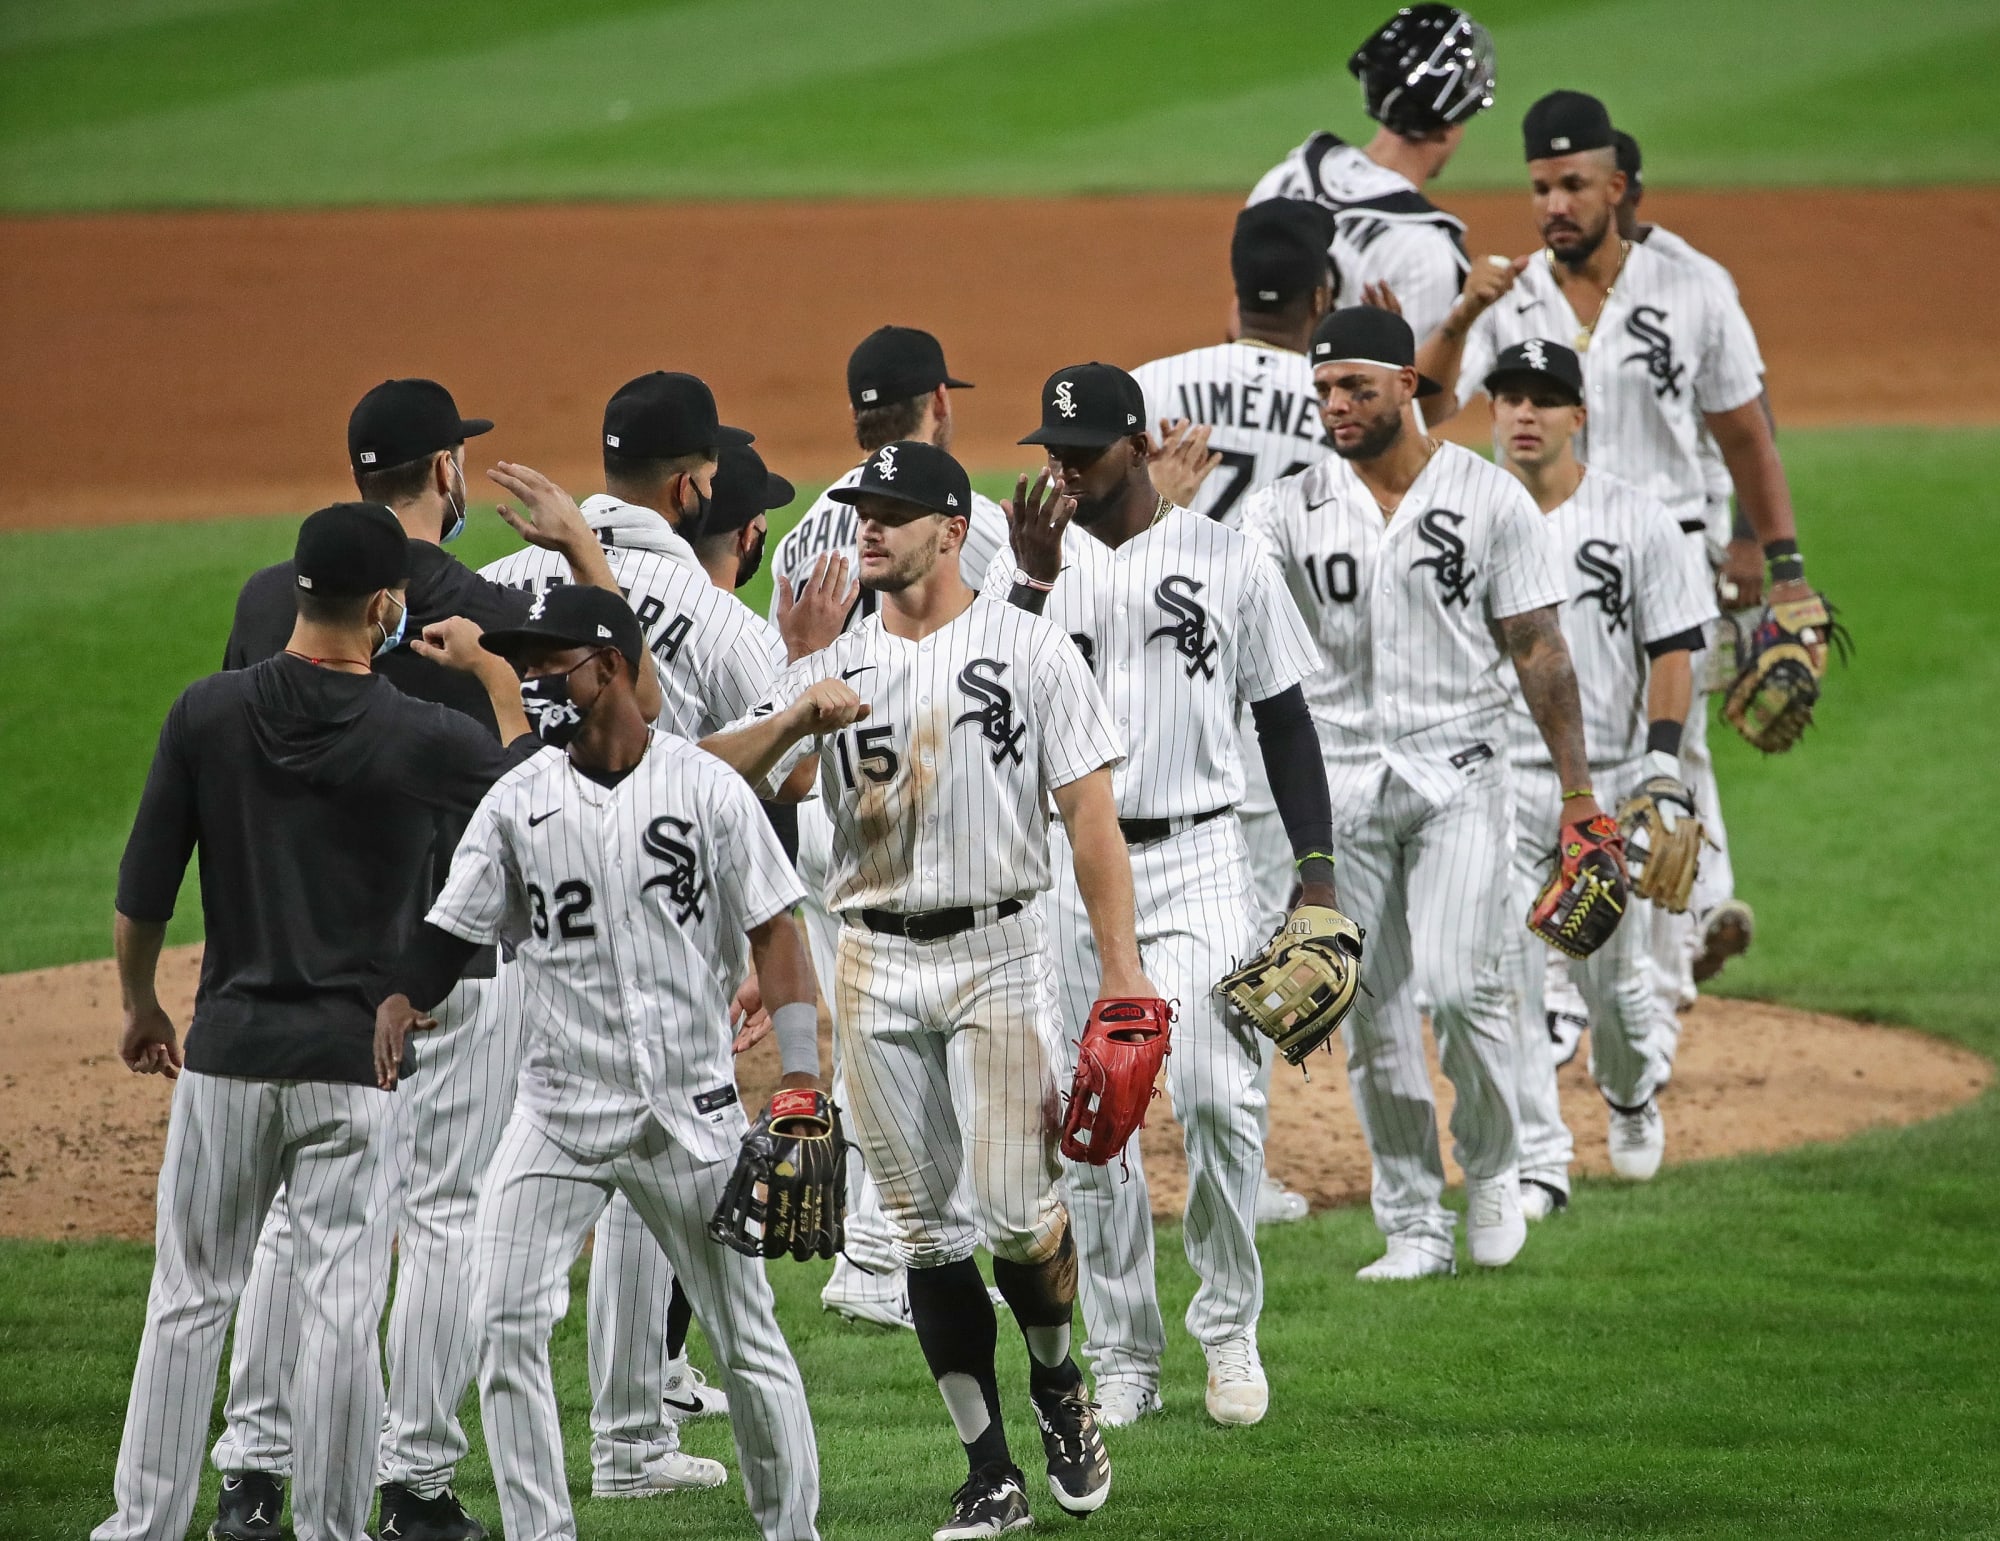 Chicago White Sox Firstever "win or go home" game in history